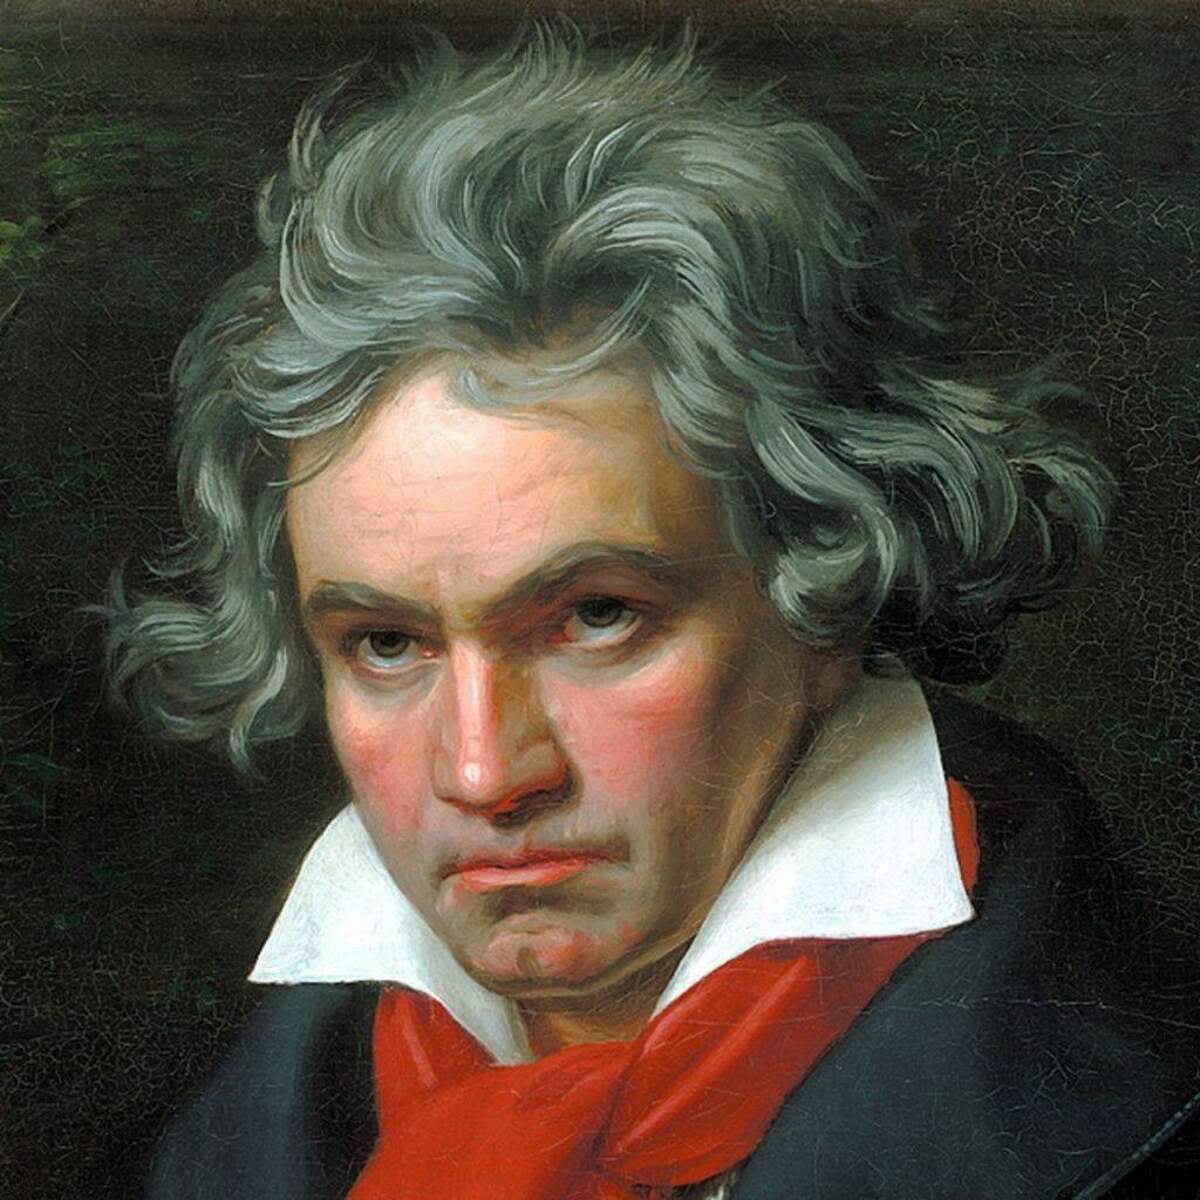 An illustration of Beethoven.